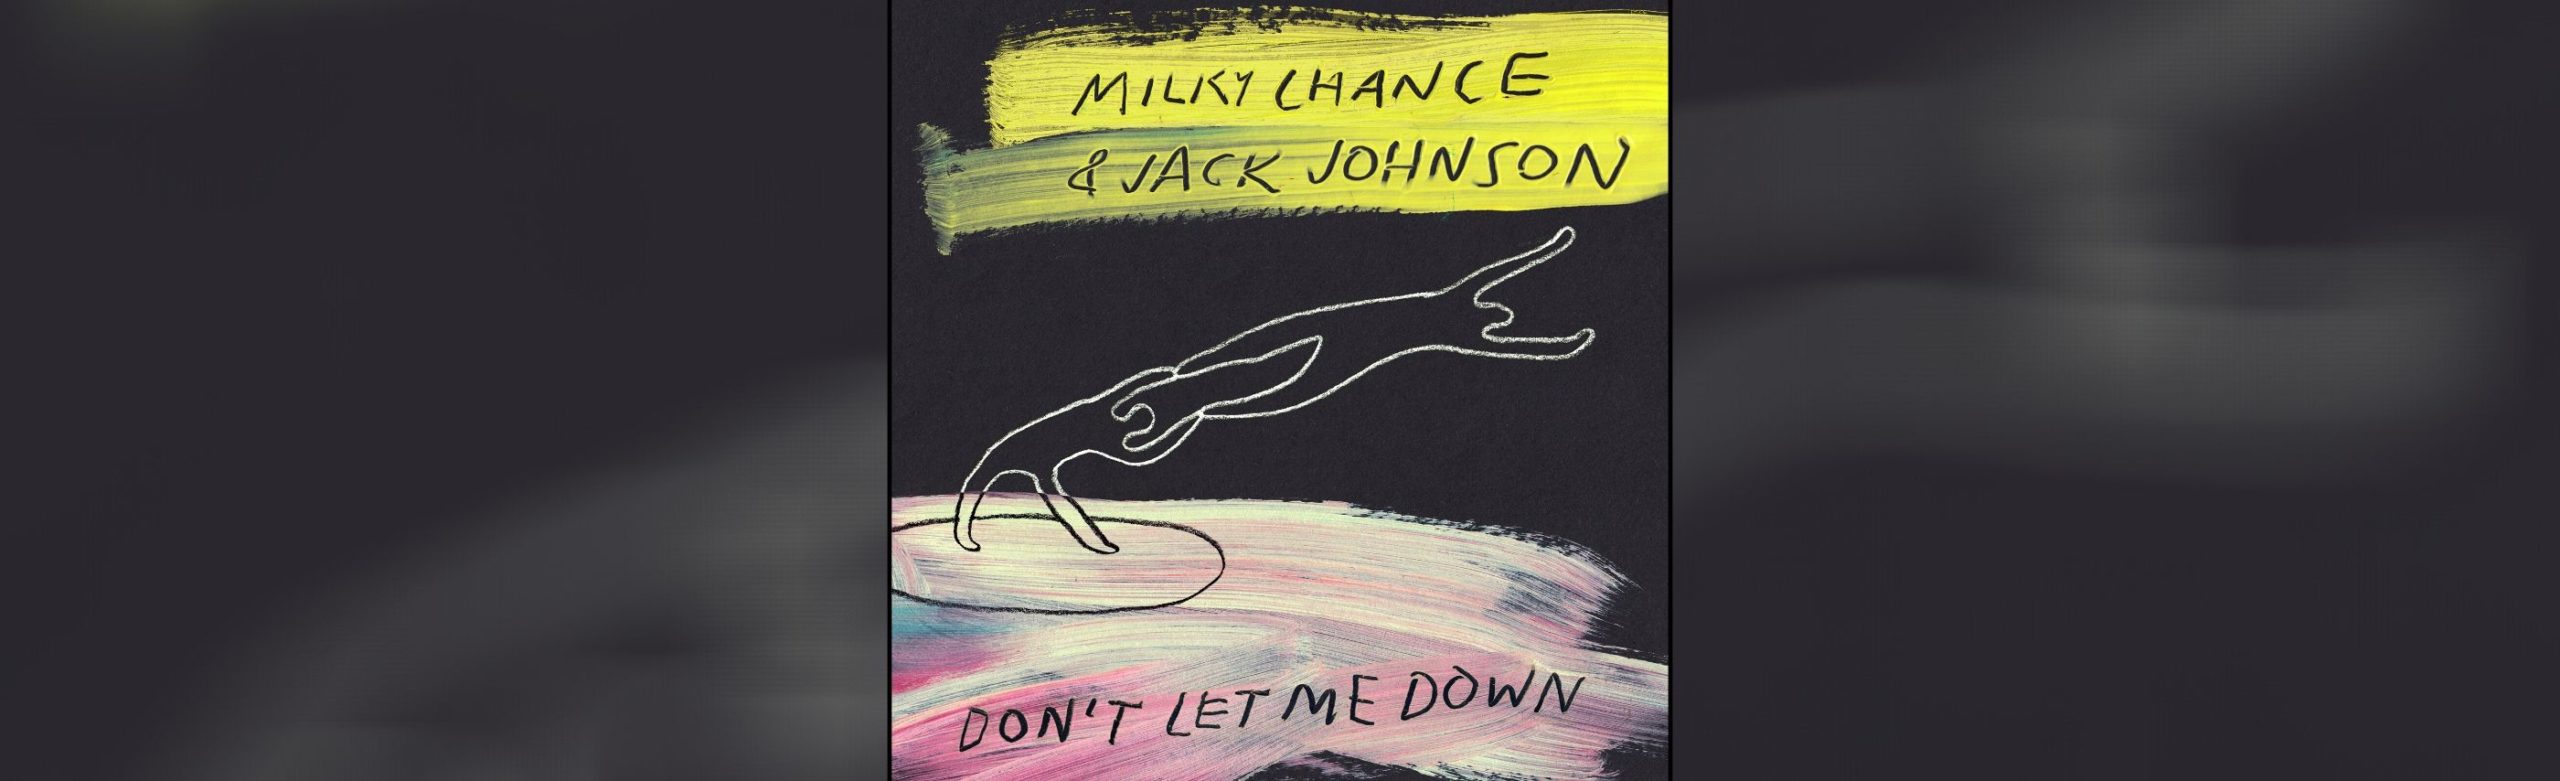 Milky Chance Team Up with Jack Johnson on New Song Image